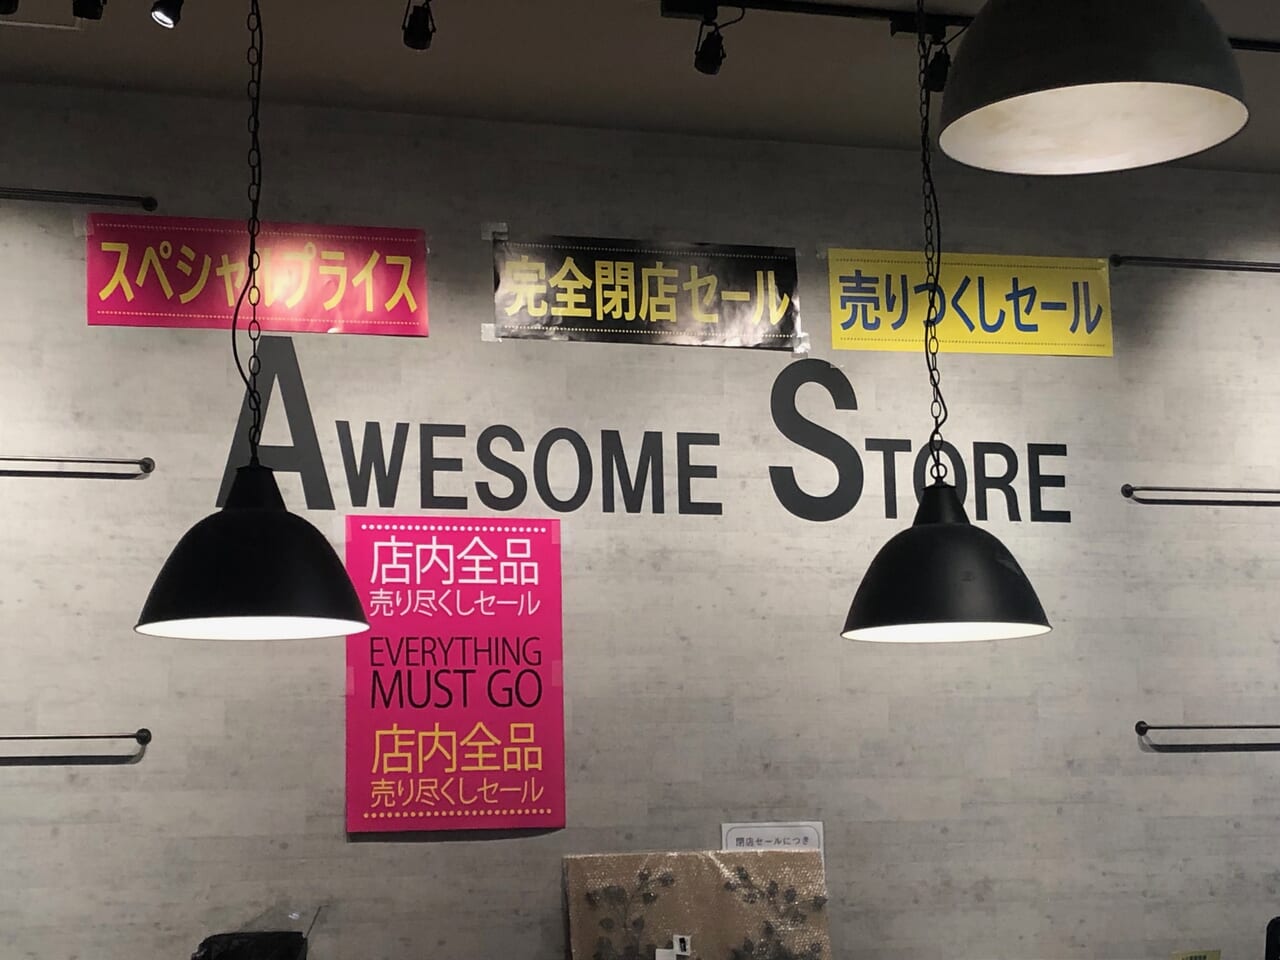 AWESOME STORE 宮崎店